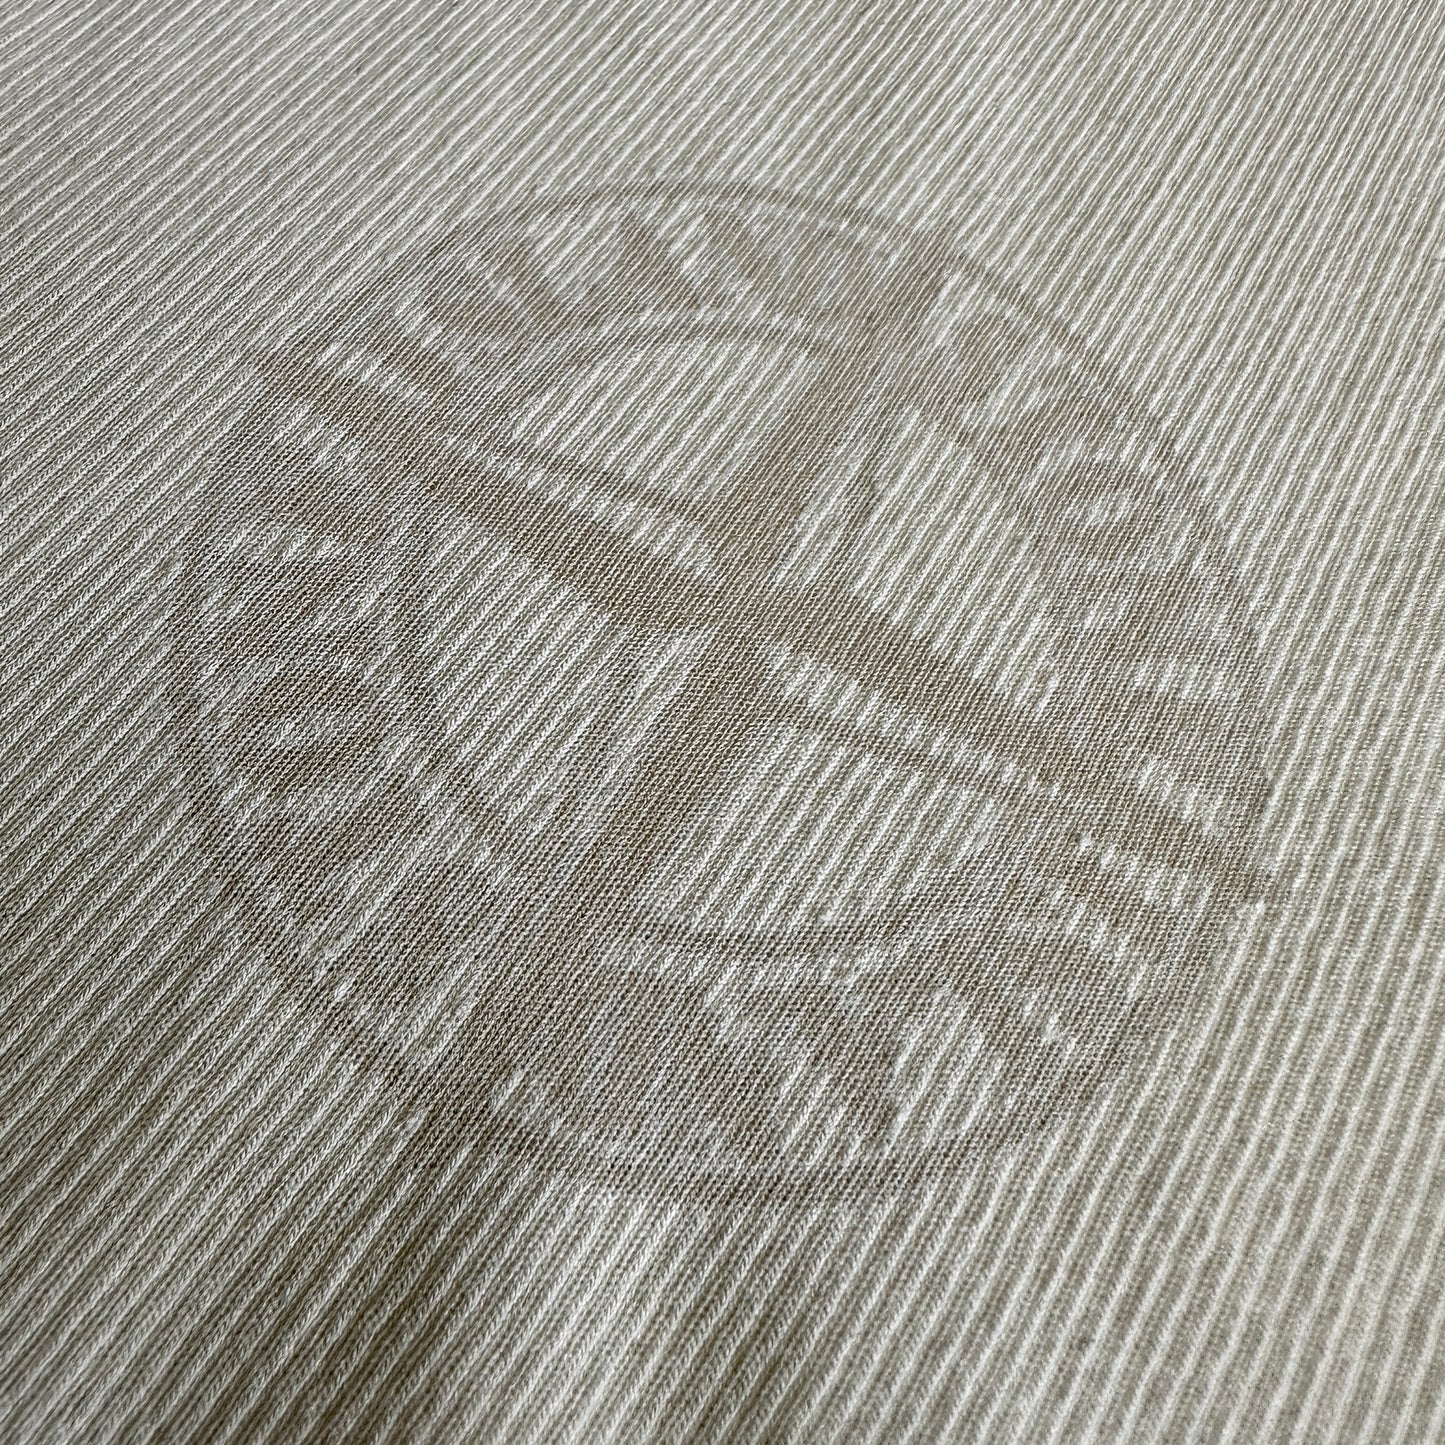 Stone Island Vintage 1998 T-Shirt - XL - Made in Italy